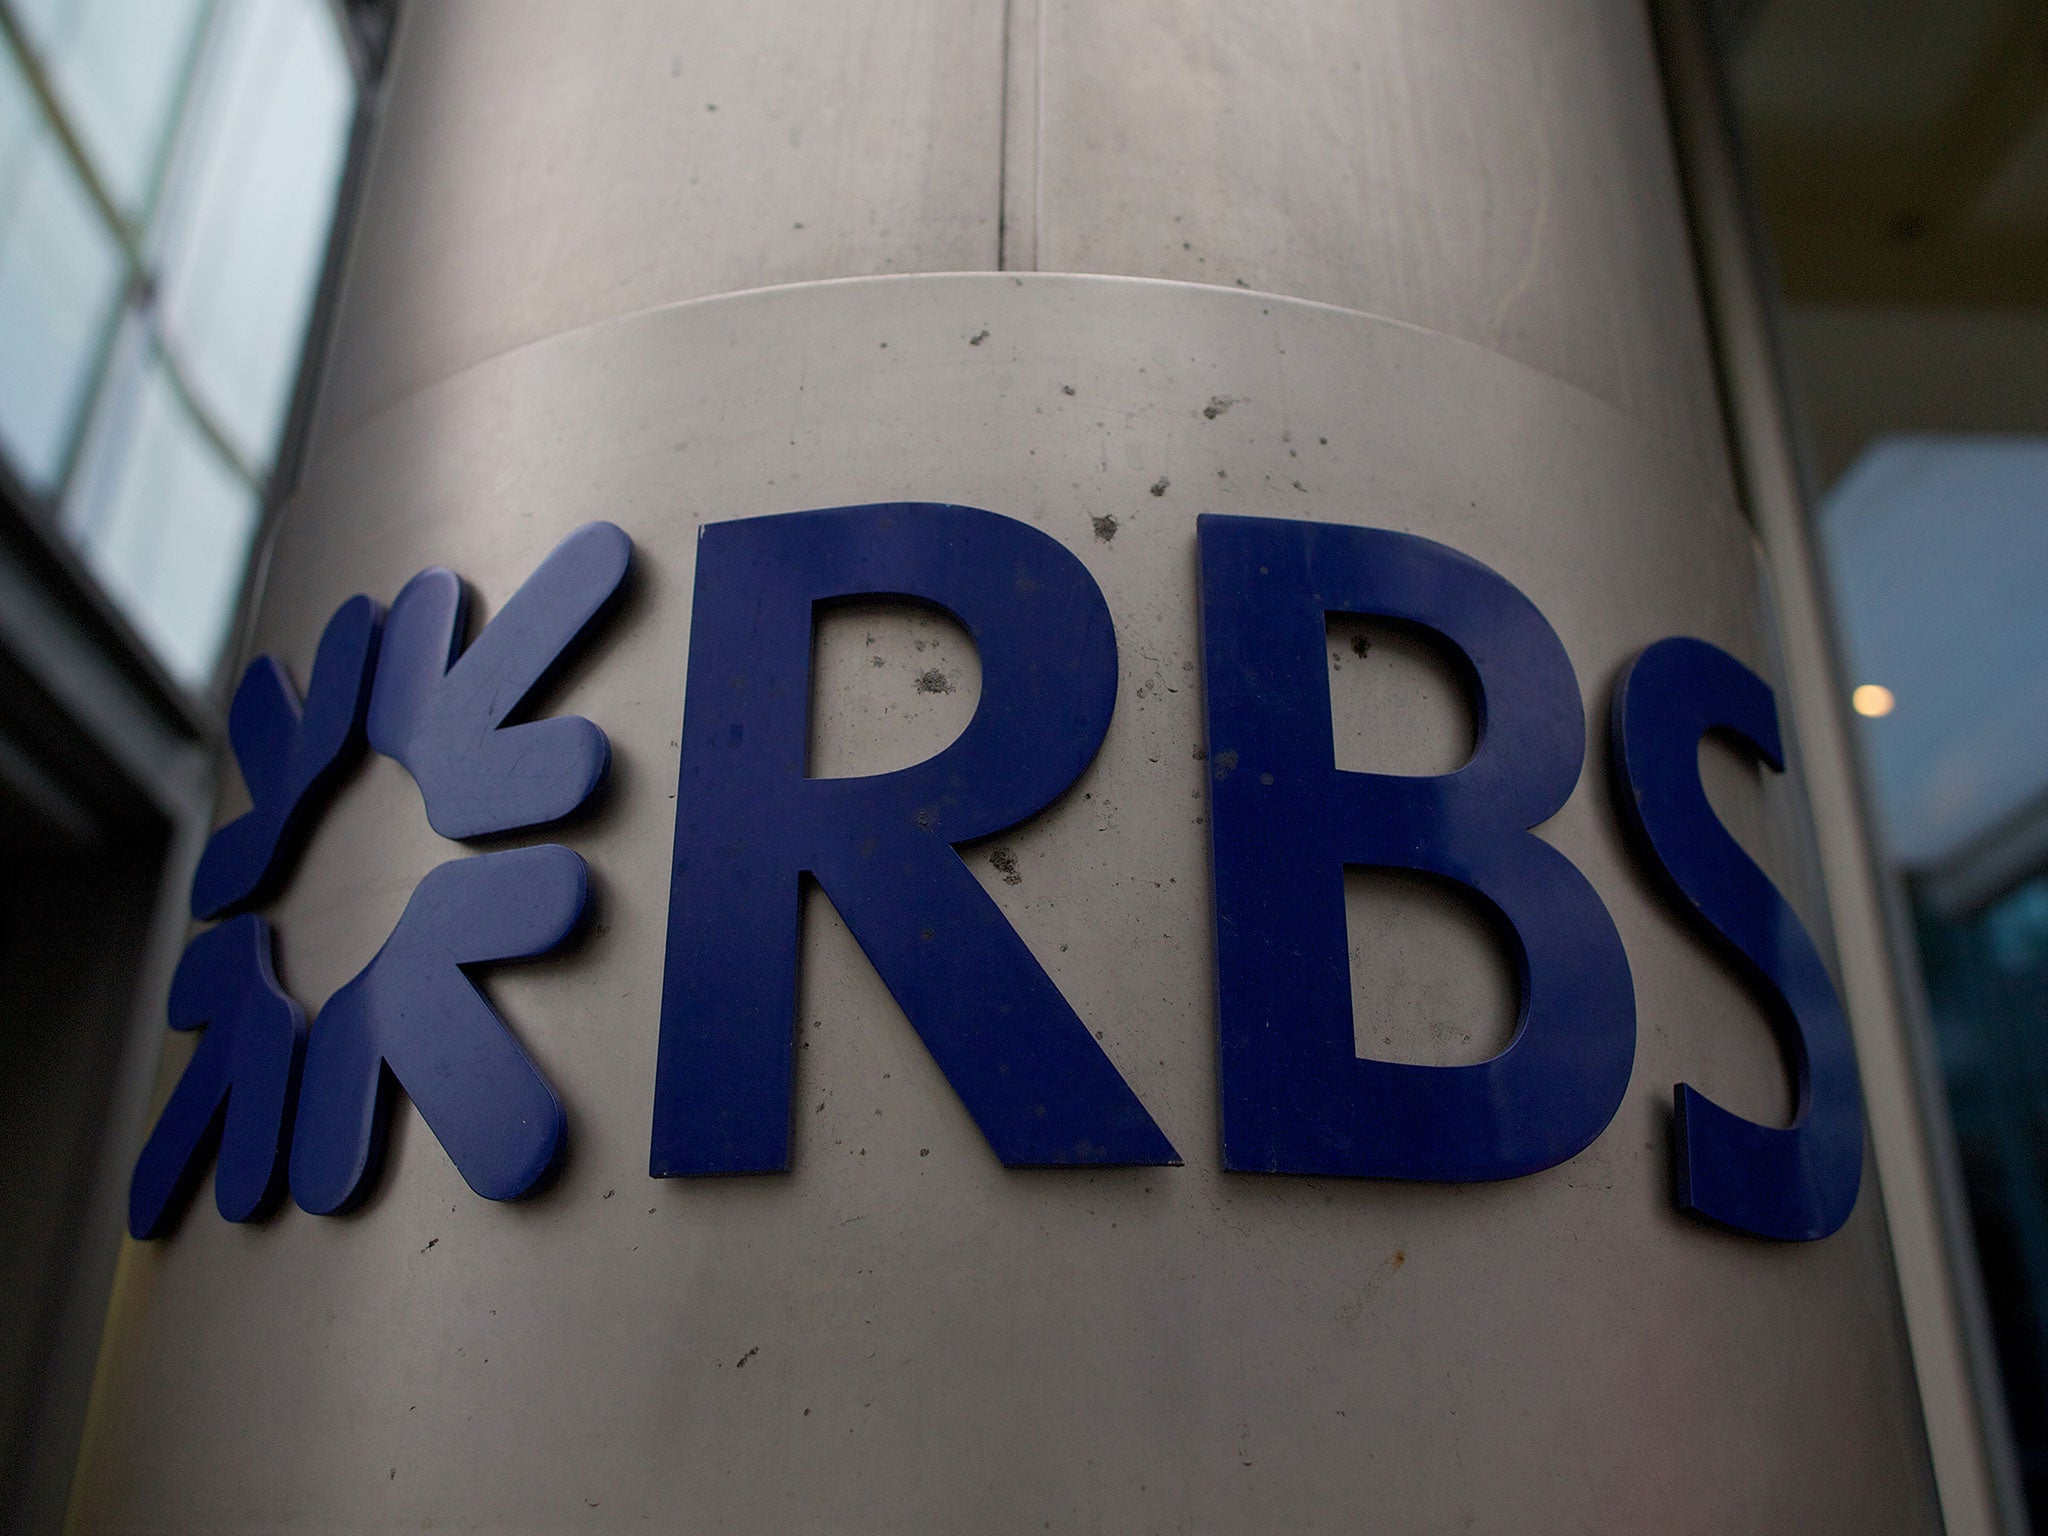 RBS has set up a £400m compensation fund for small businesses